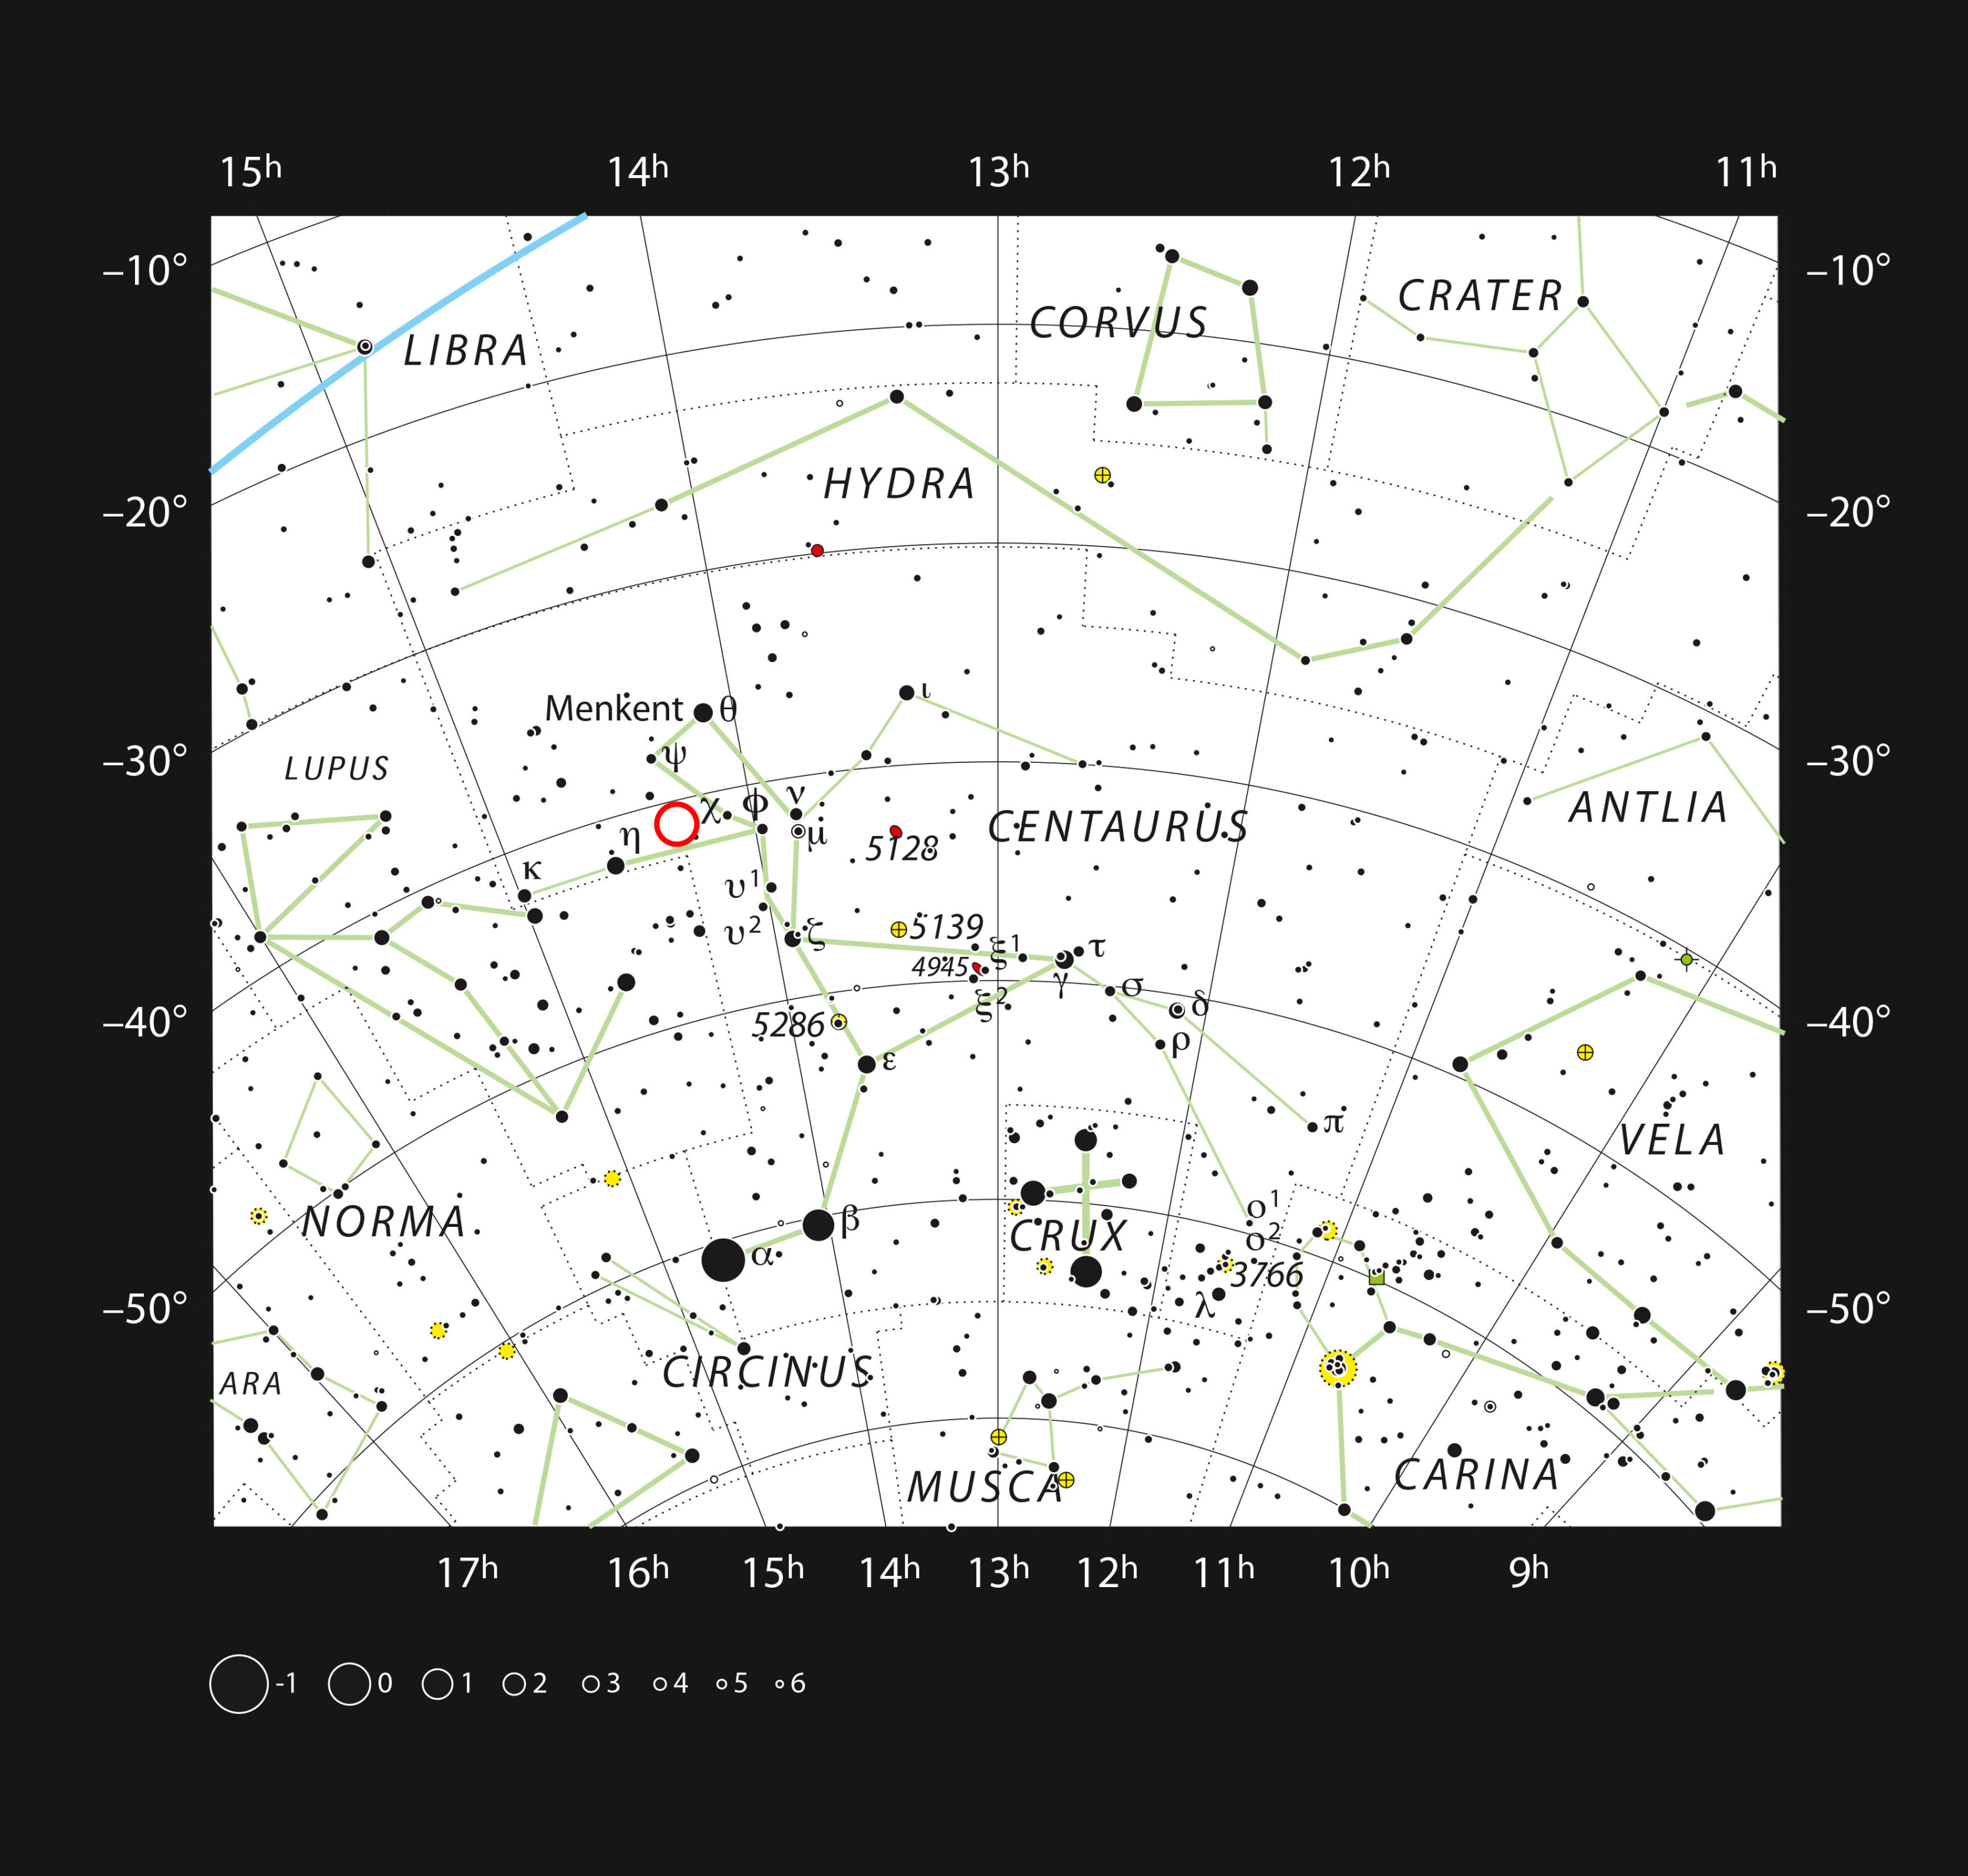 This chart shows the southern constellation of Centaurus and marks most of the stars visible to the unaided eye on a clear dark night. The dwarf star PDS 70 is marked with a red circle. Credit: ESO, IAU and Sky & Telescope